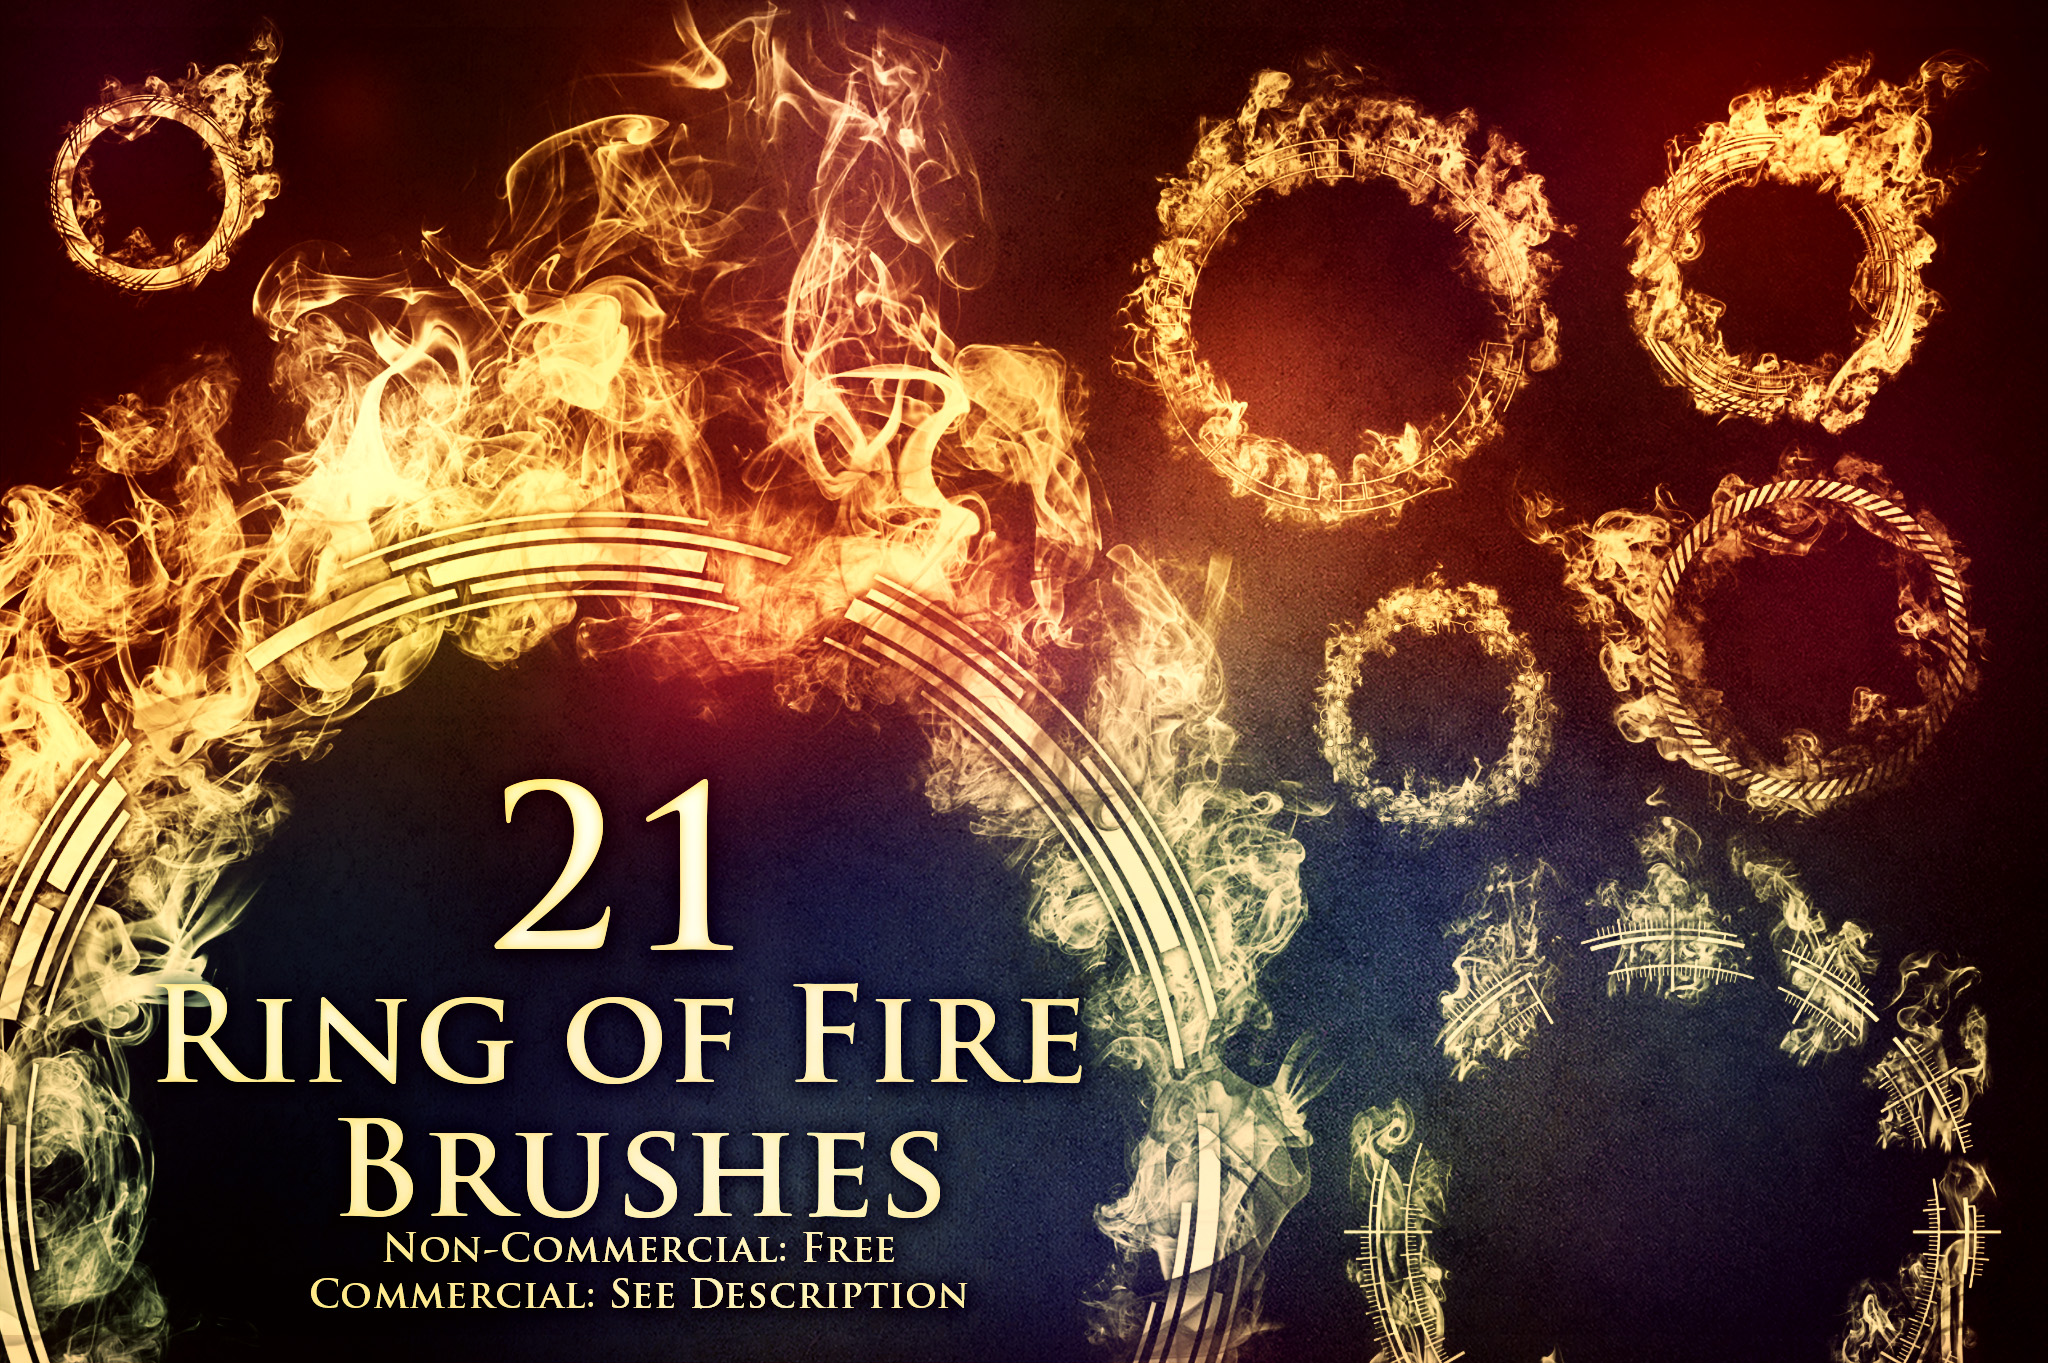 21 Ring of Fire Brushes